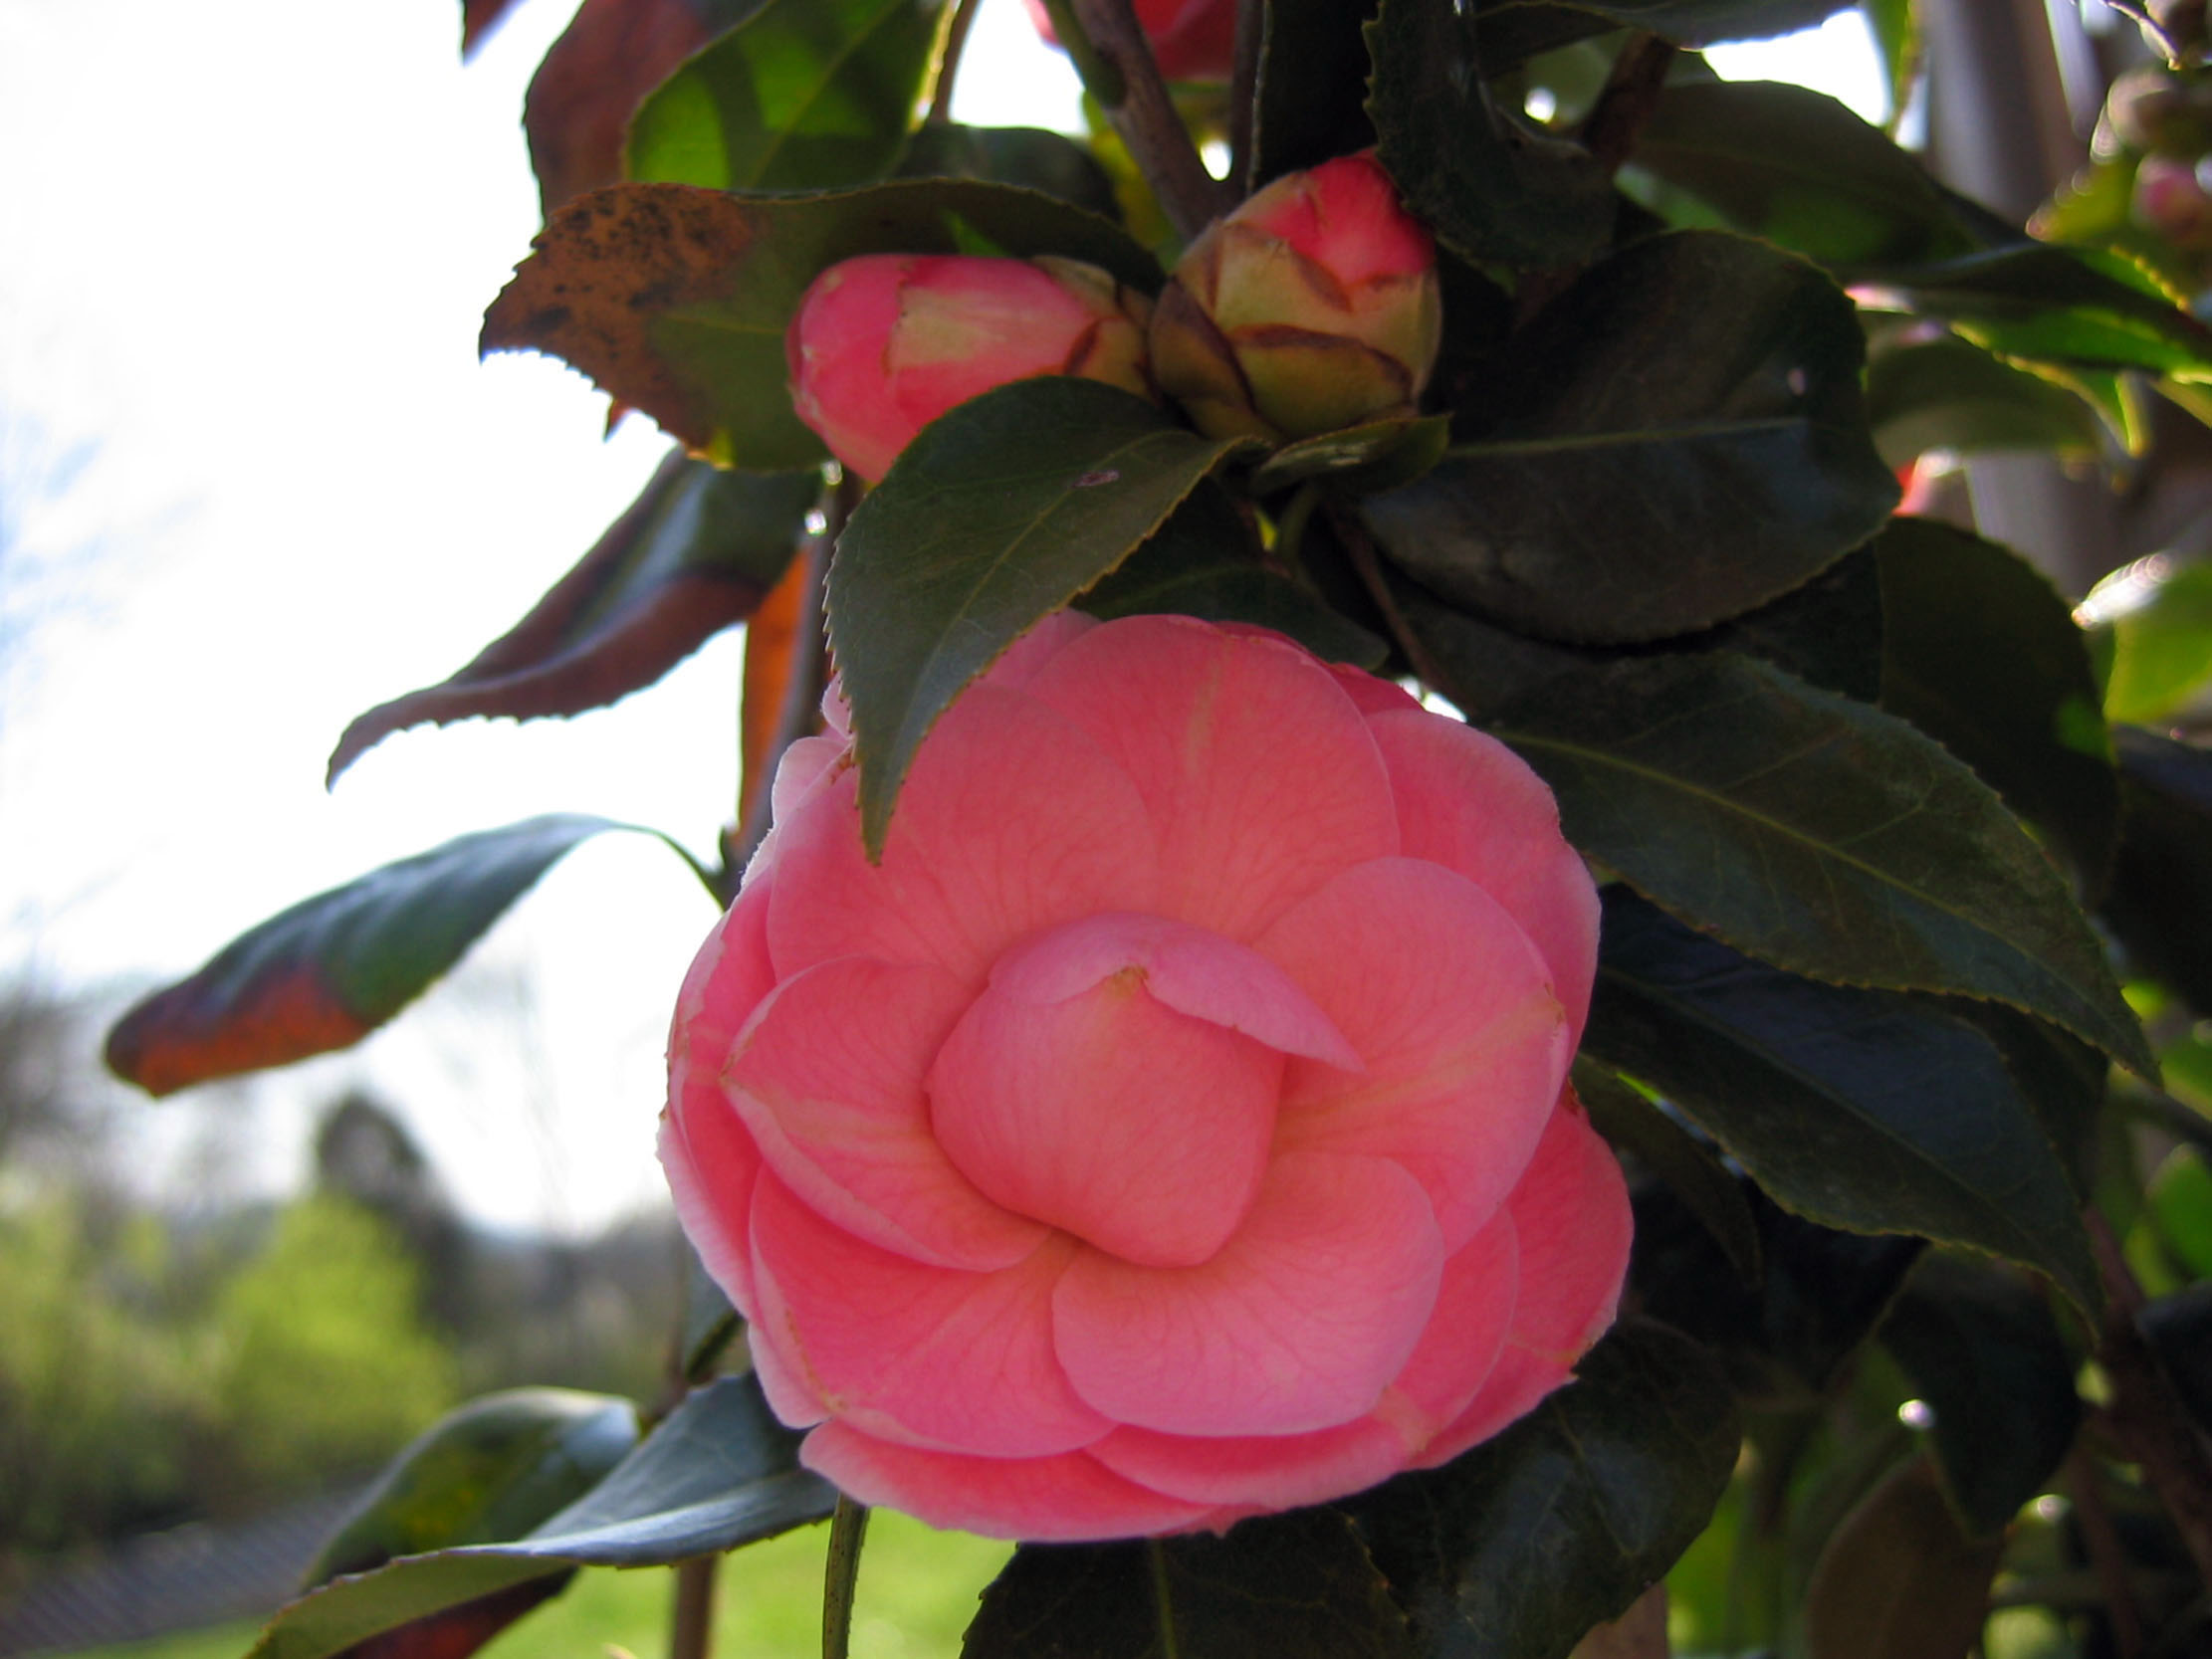 My very first Camelia